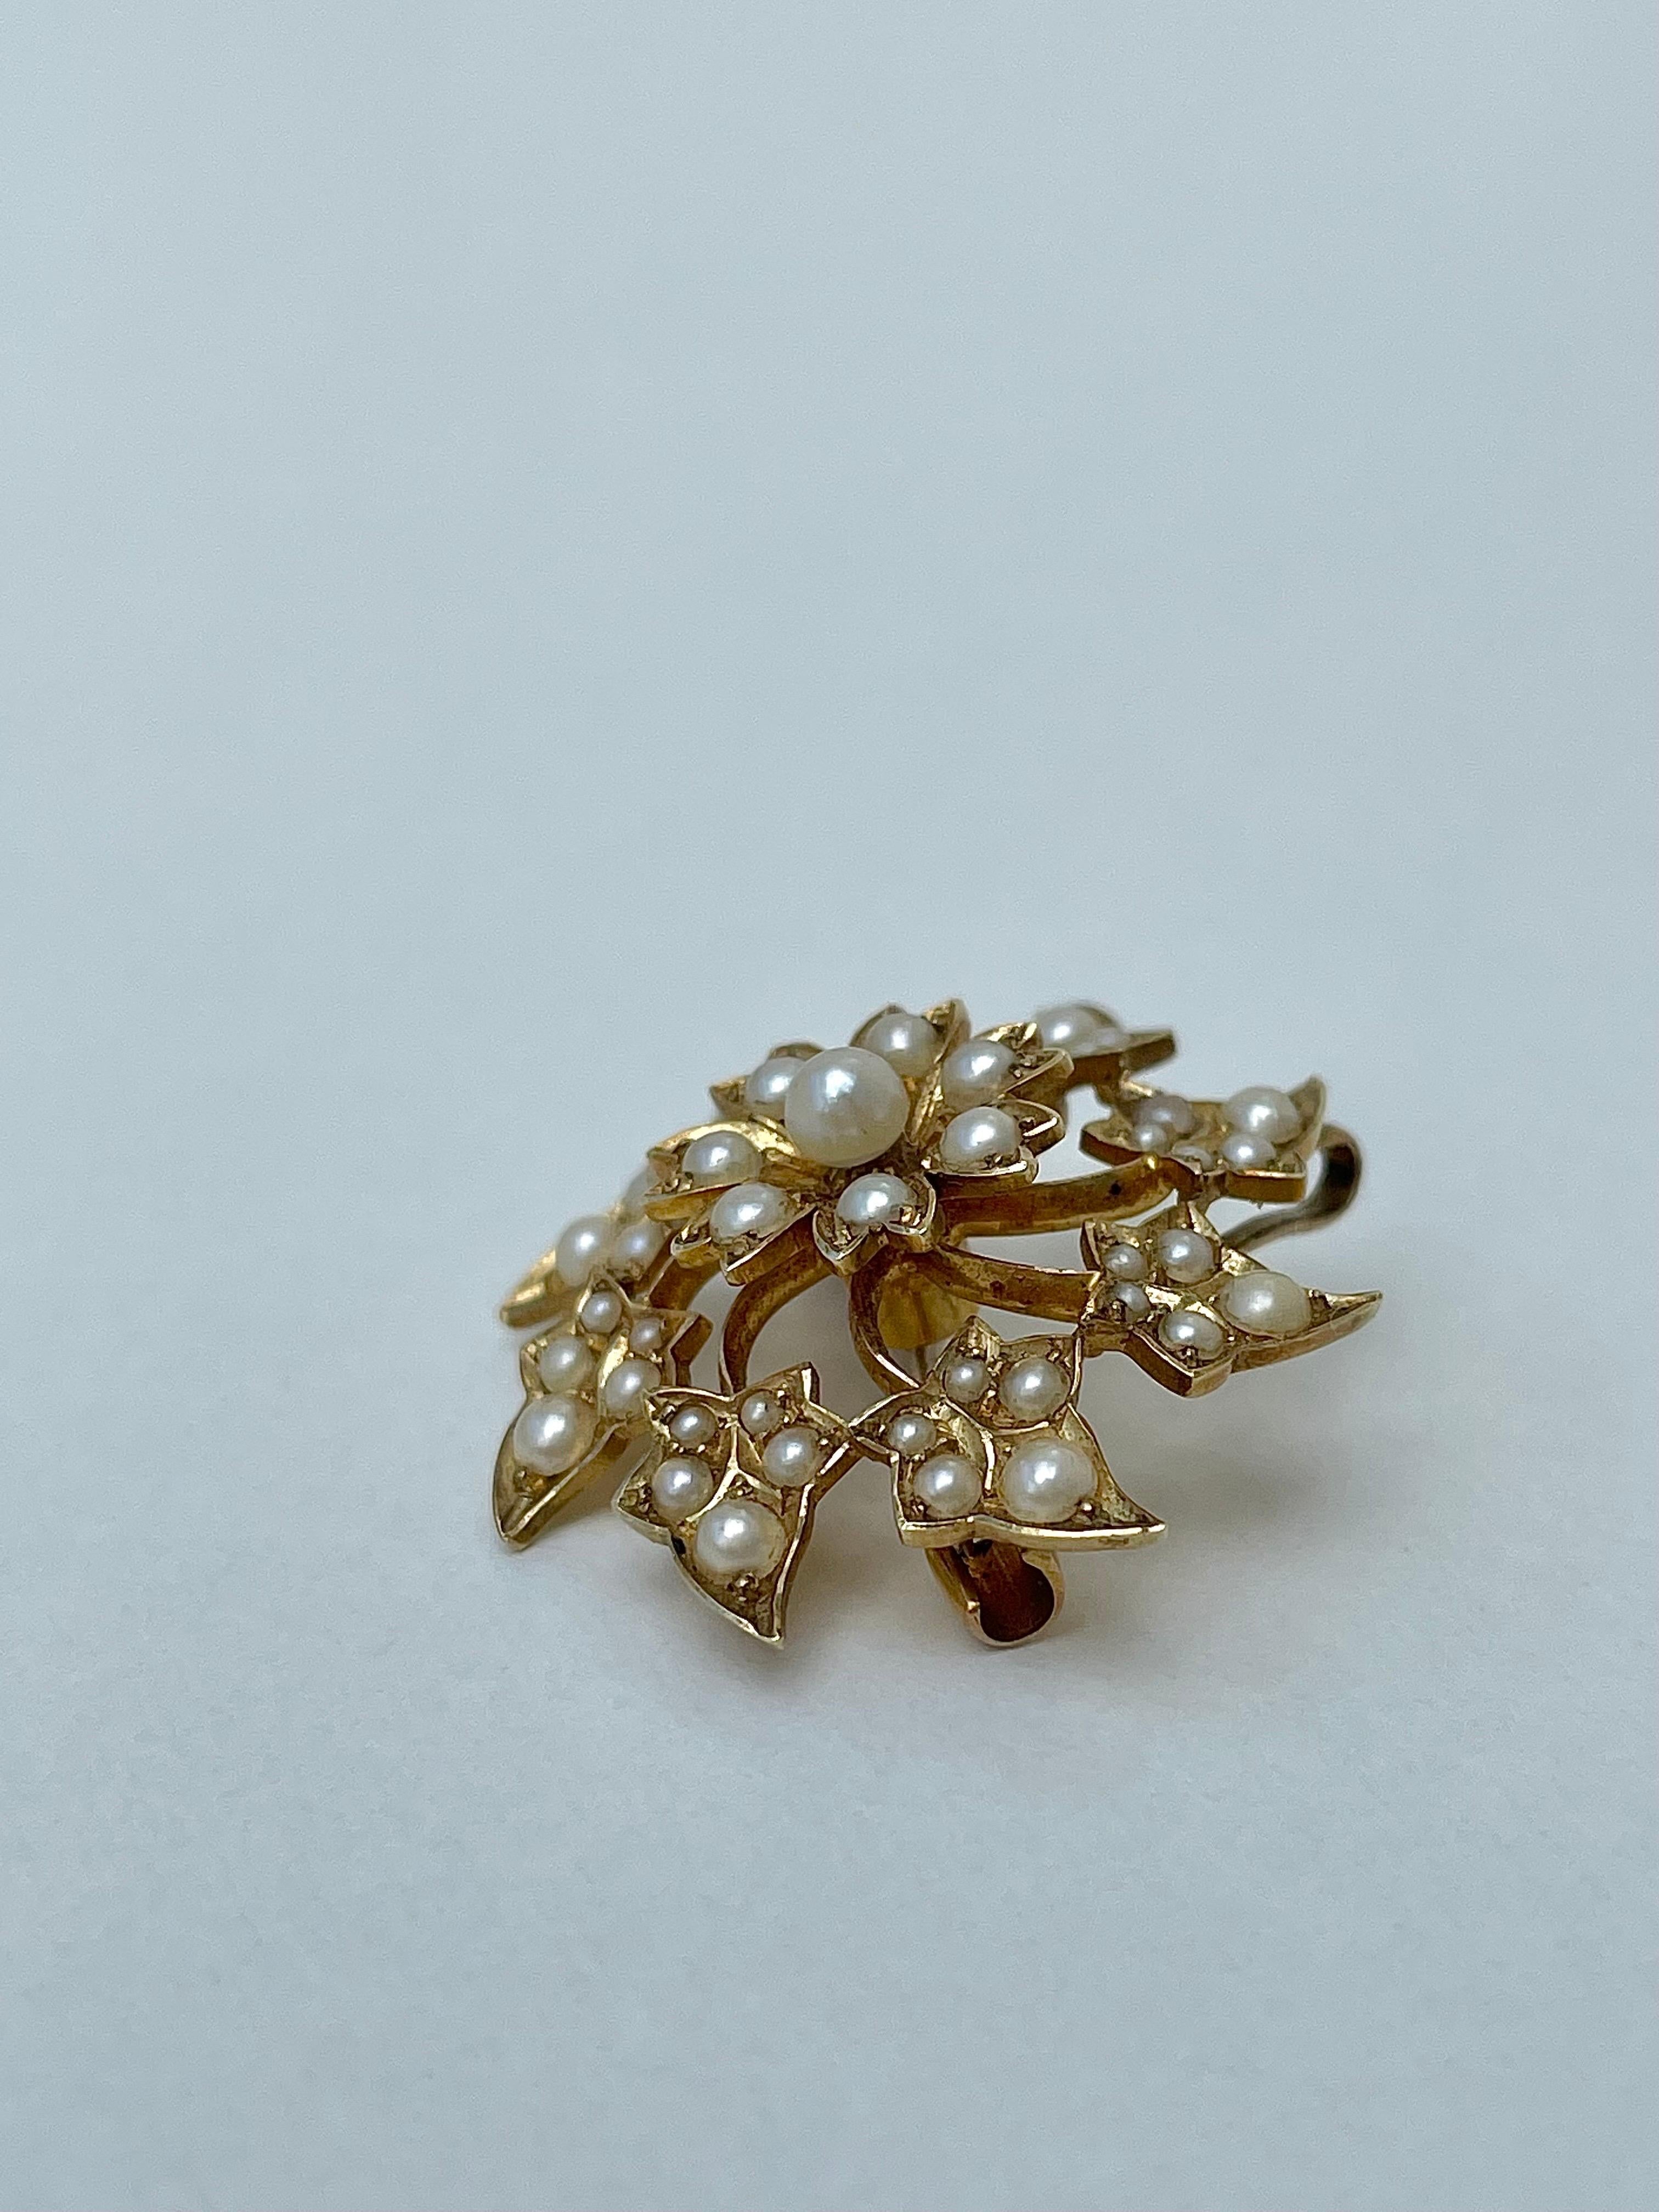 Antique Yellow Gold Pearl Floral Starburst Pendant/ Brooch 

the most exquisite floral brooch, i’m obsessed! 

The item comes without the box in the photos but will be presented in a gift box

Measurements: weight 4.85g, length 25.7mm x